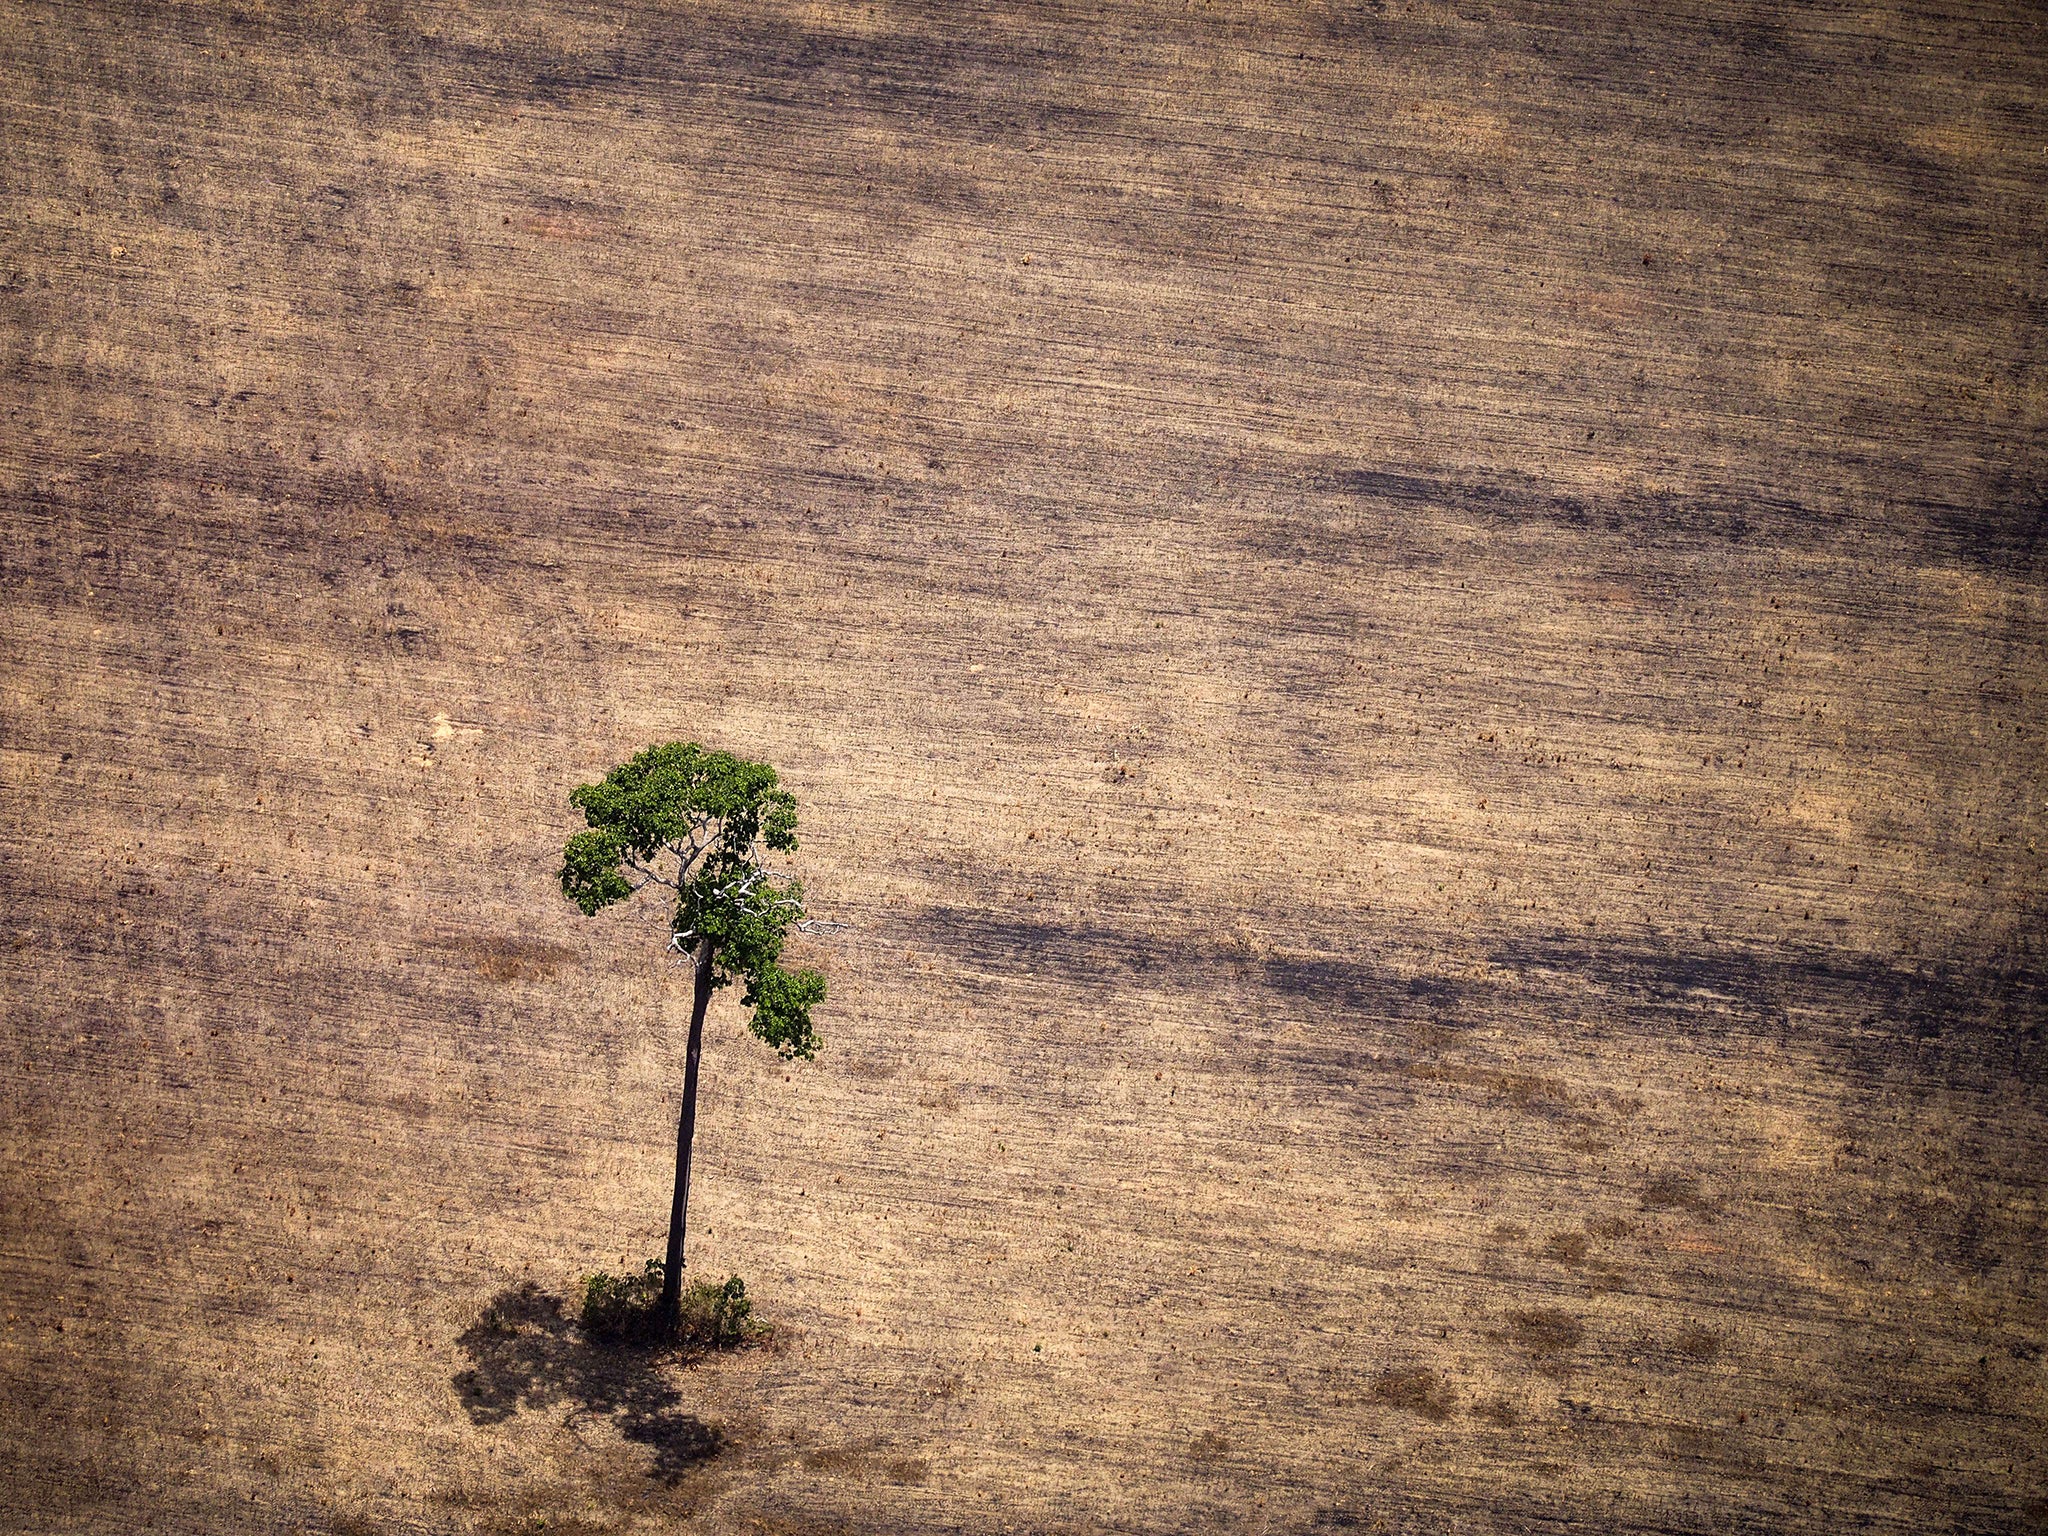 Deforestation has stripped parts of the Amazon, such as here in the state of Para, Brazil